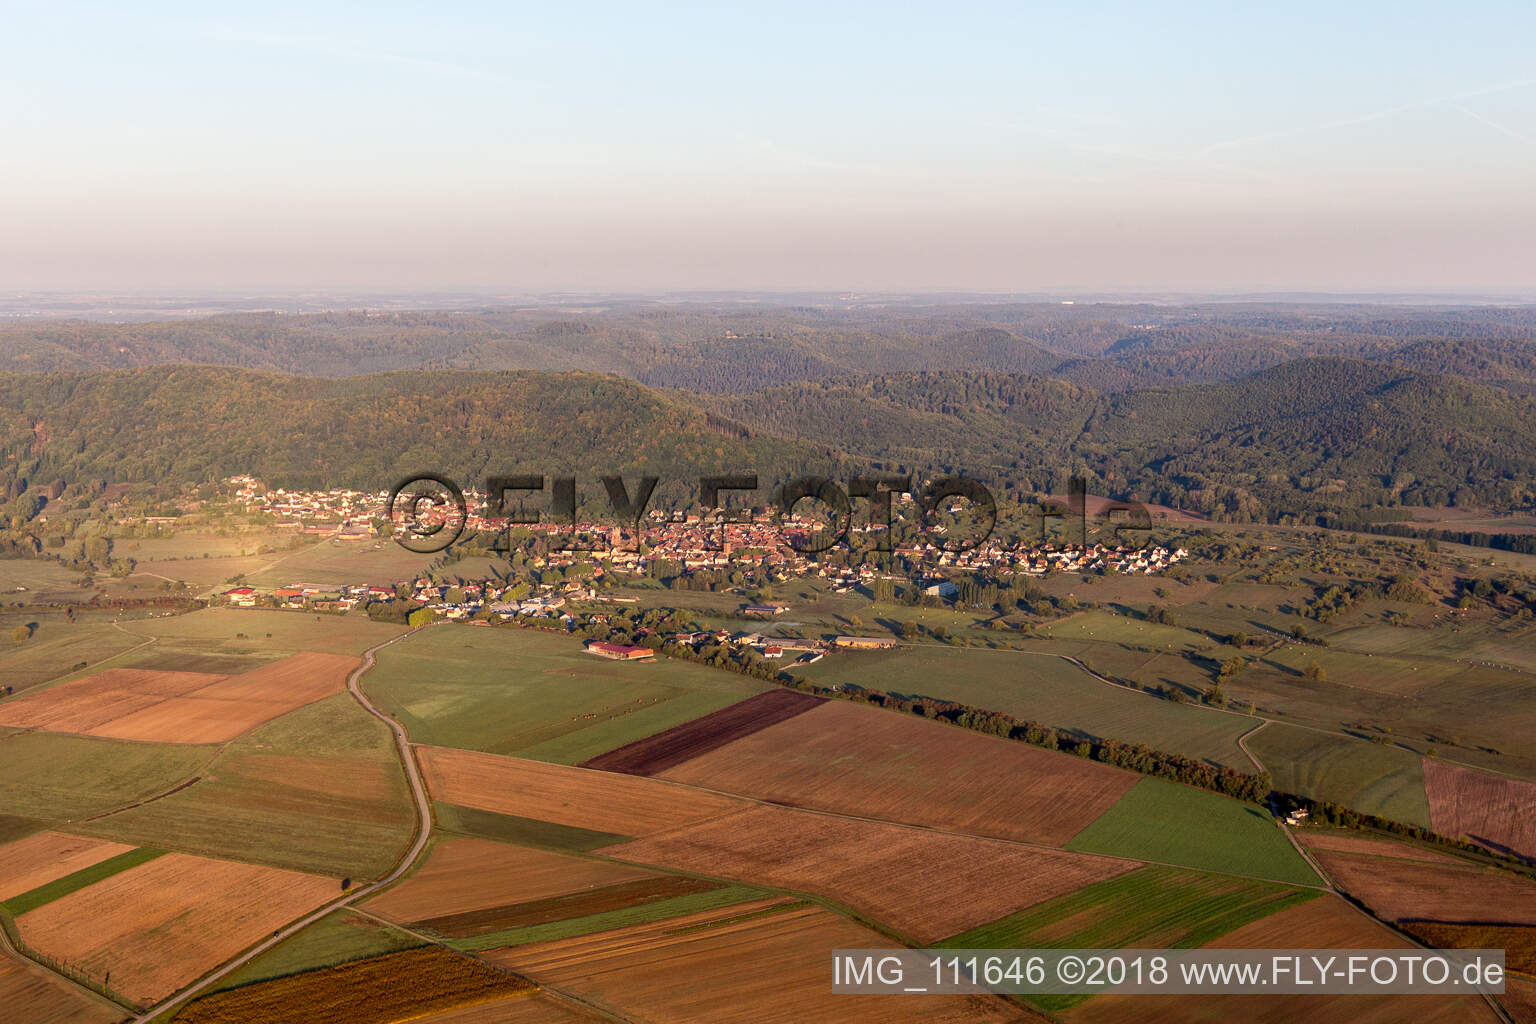 Neuwiller-lès-Saverne in the state Bas-Rhin, France seen from a drone